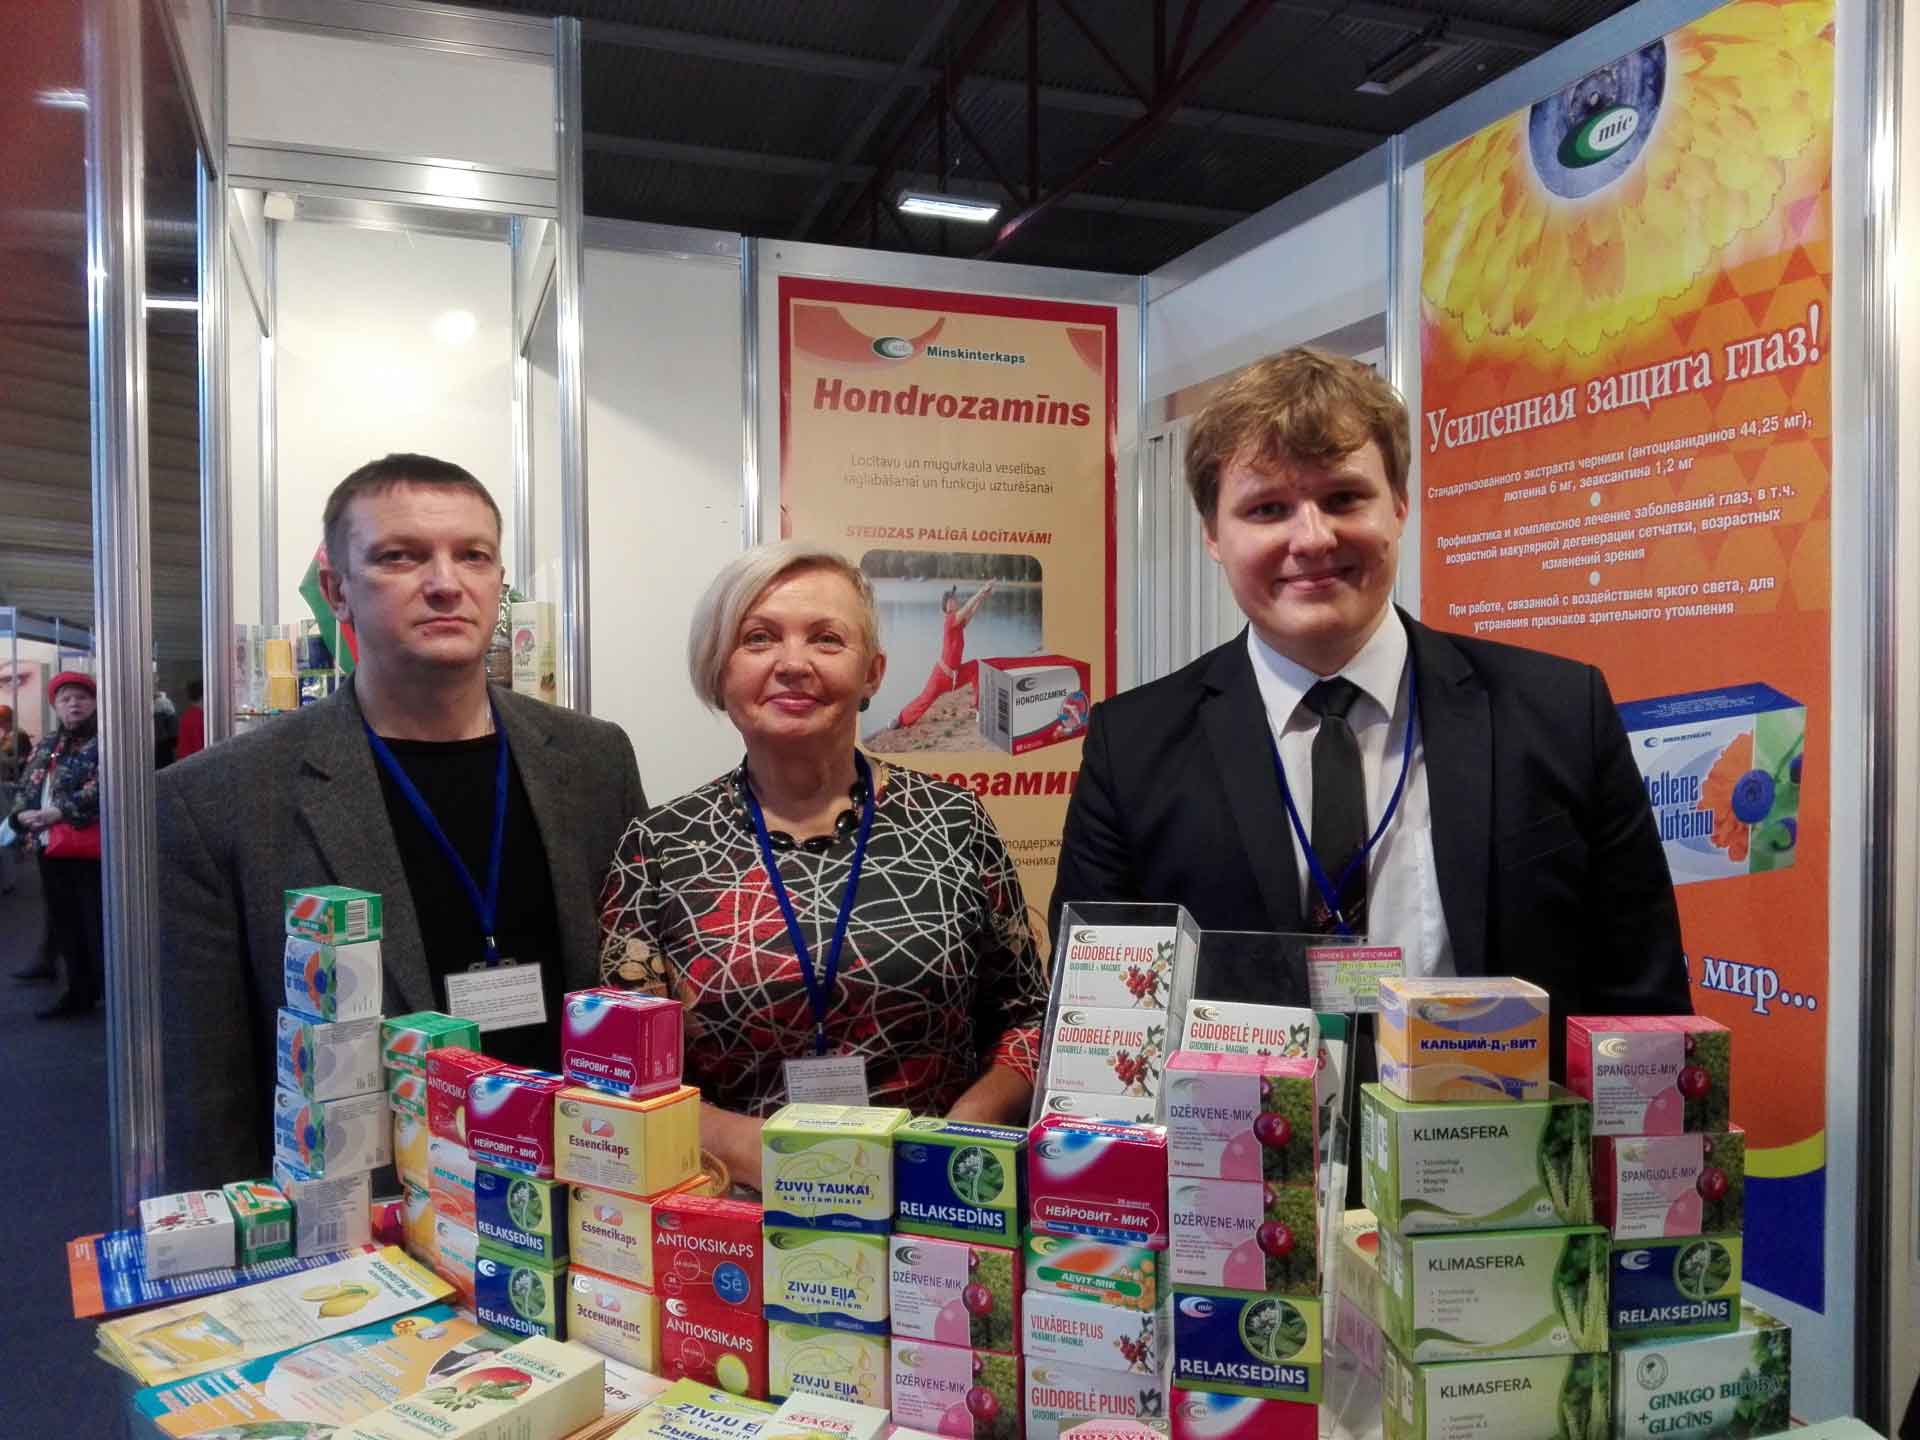 Minskintercaps participated in global I international exhibition dedicated to healthcare and beauty Baltic Beauty 2017